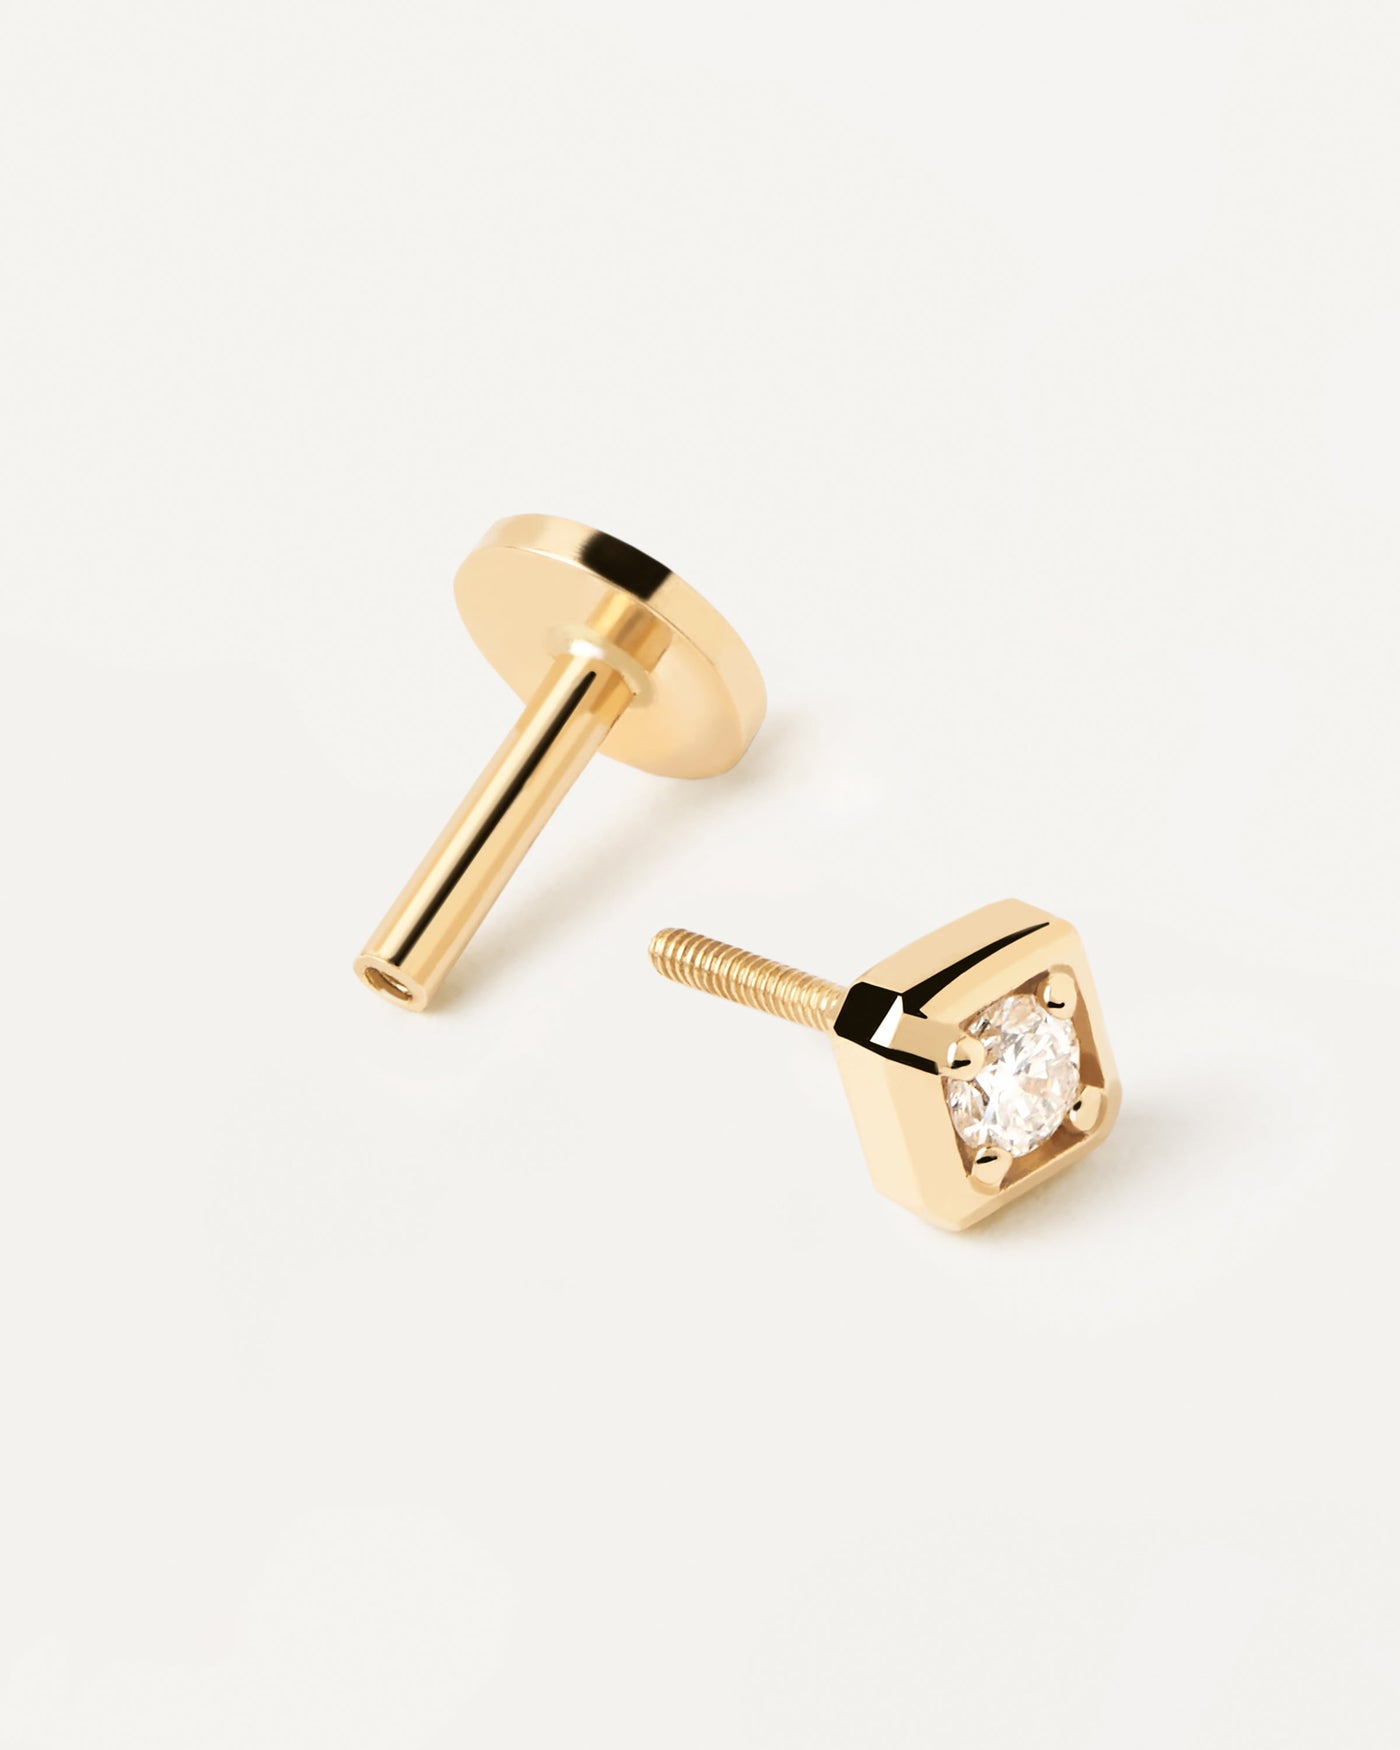 2023 Selection | Diamond and gold Ava Single Earring. Solid yellow gold ear piercing with square diamond of 0.07 carat. Get the latest arrival from PDPAOLA. Place your order safely and get this Best Seller. Free Shipping.